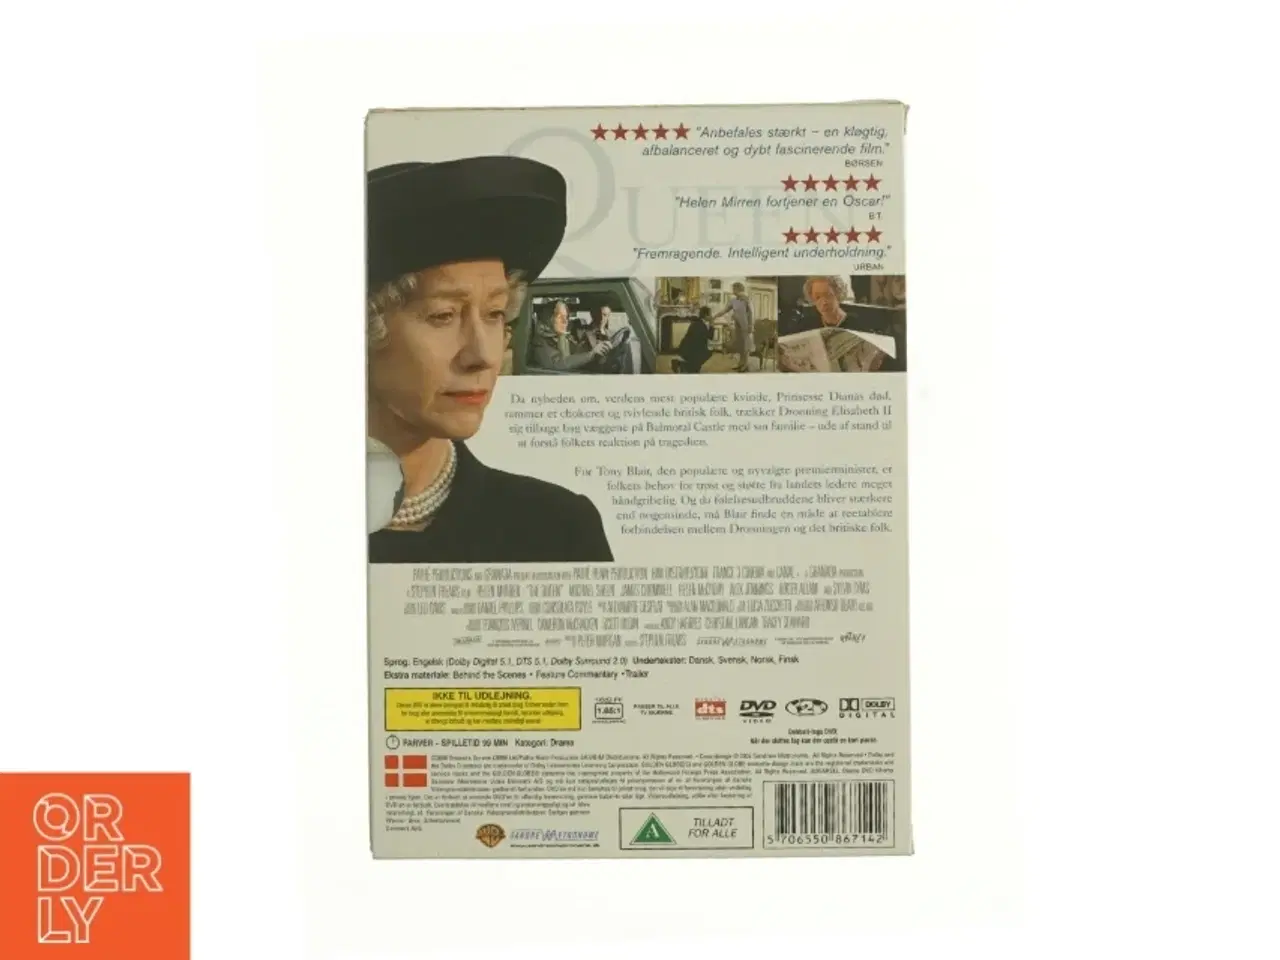 Billede 3 - Queen, The*                            <span class="label label-blank pull-right">Standard edition</span> fra DVD